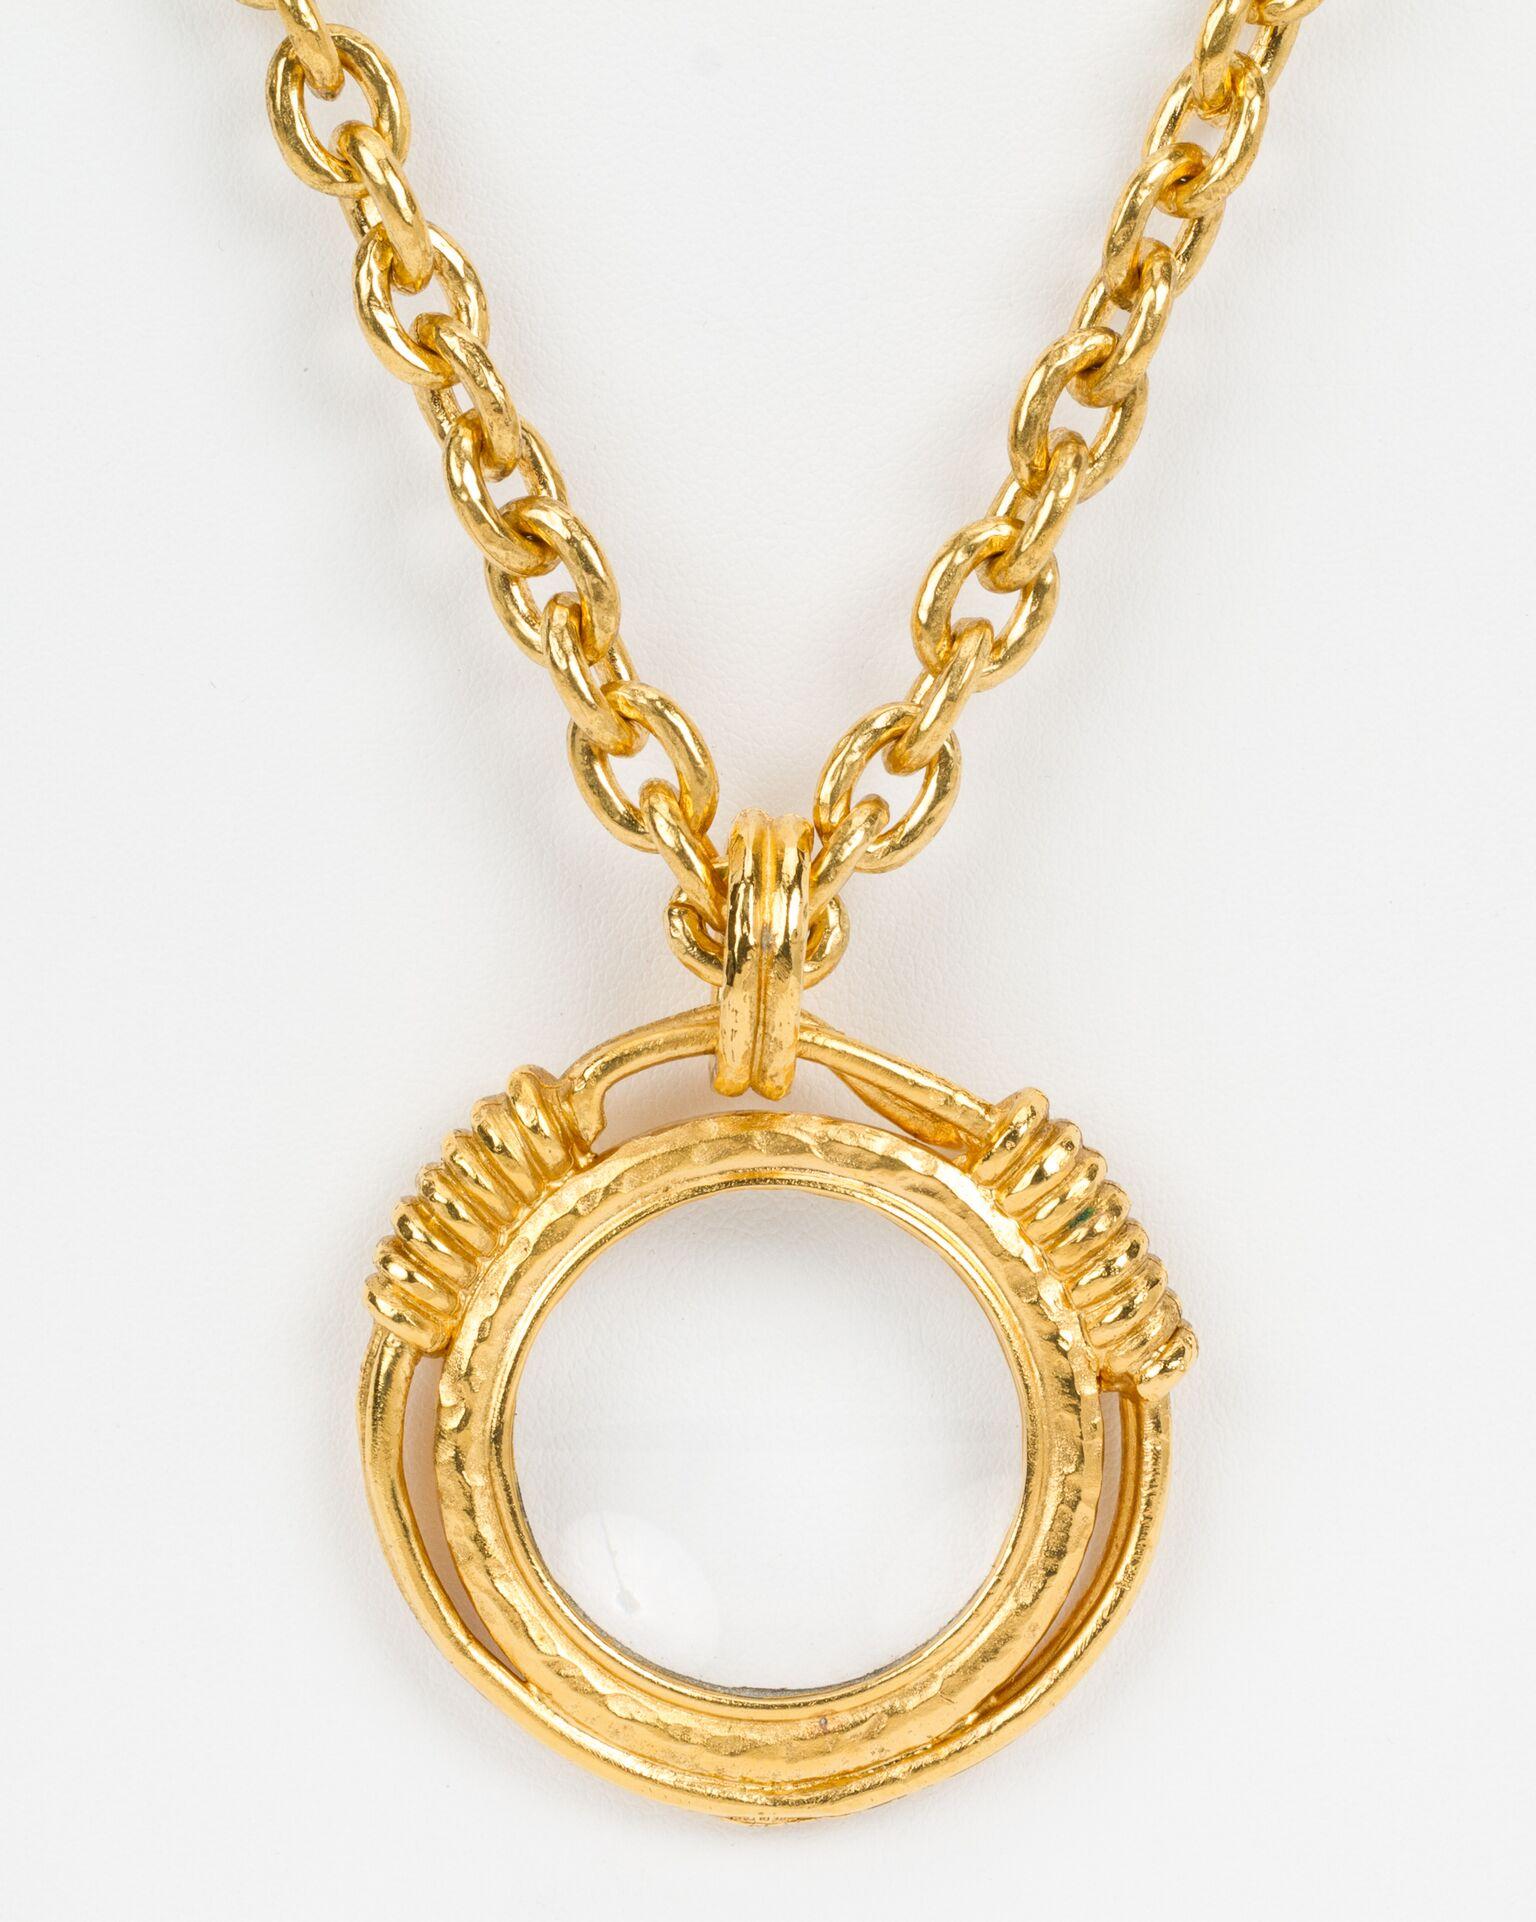 Chanel Satin Gold 80s Magnifier Necklace For Sale 2